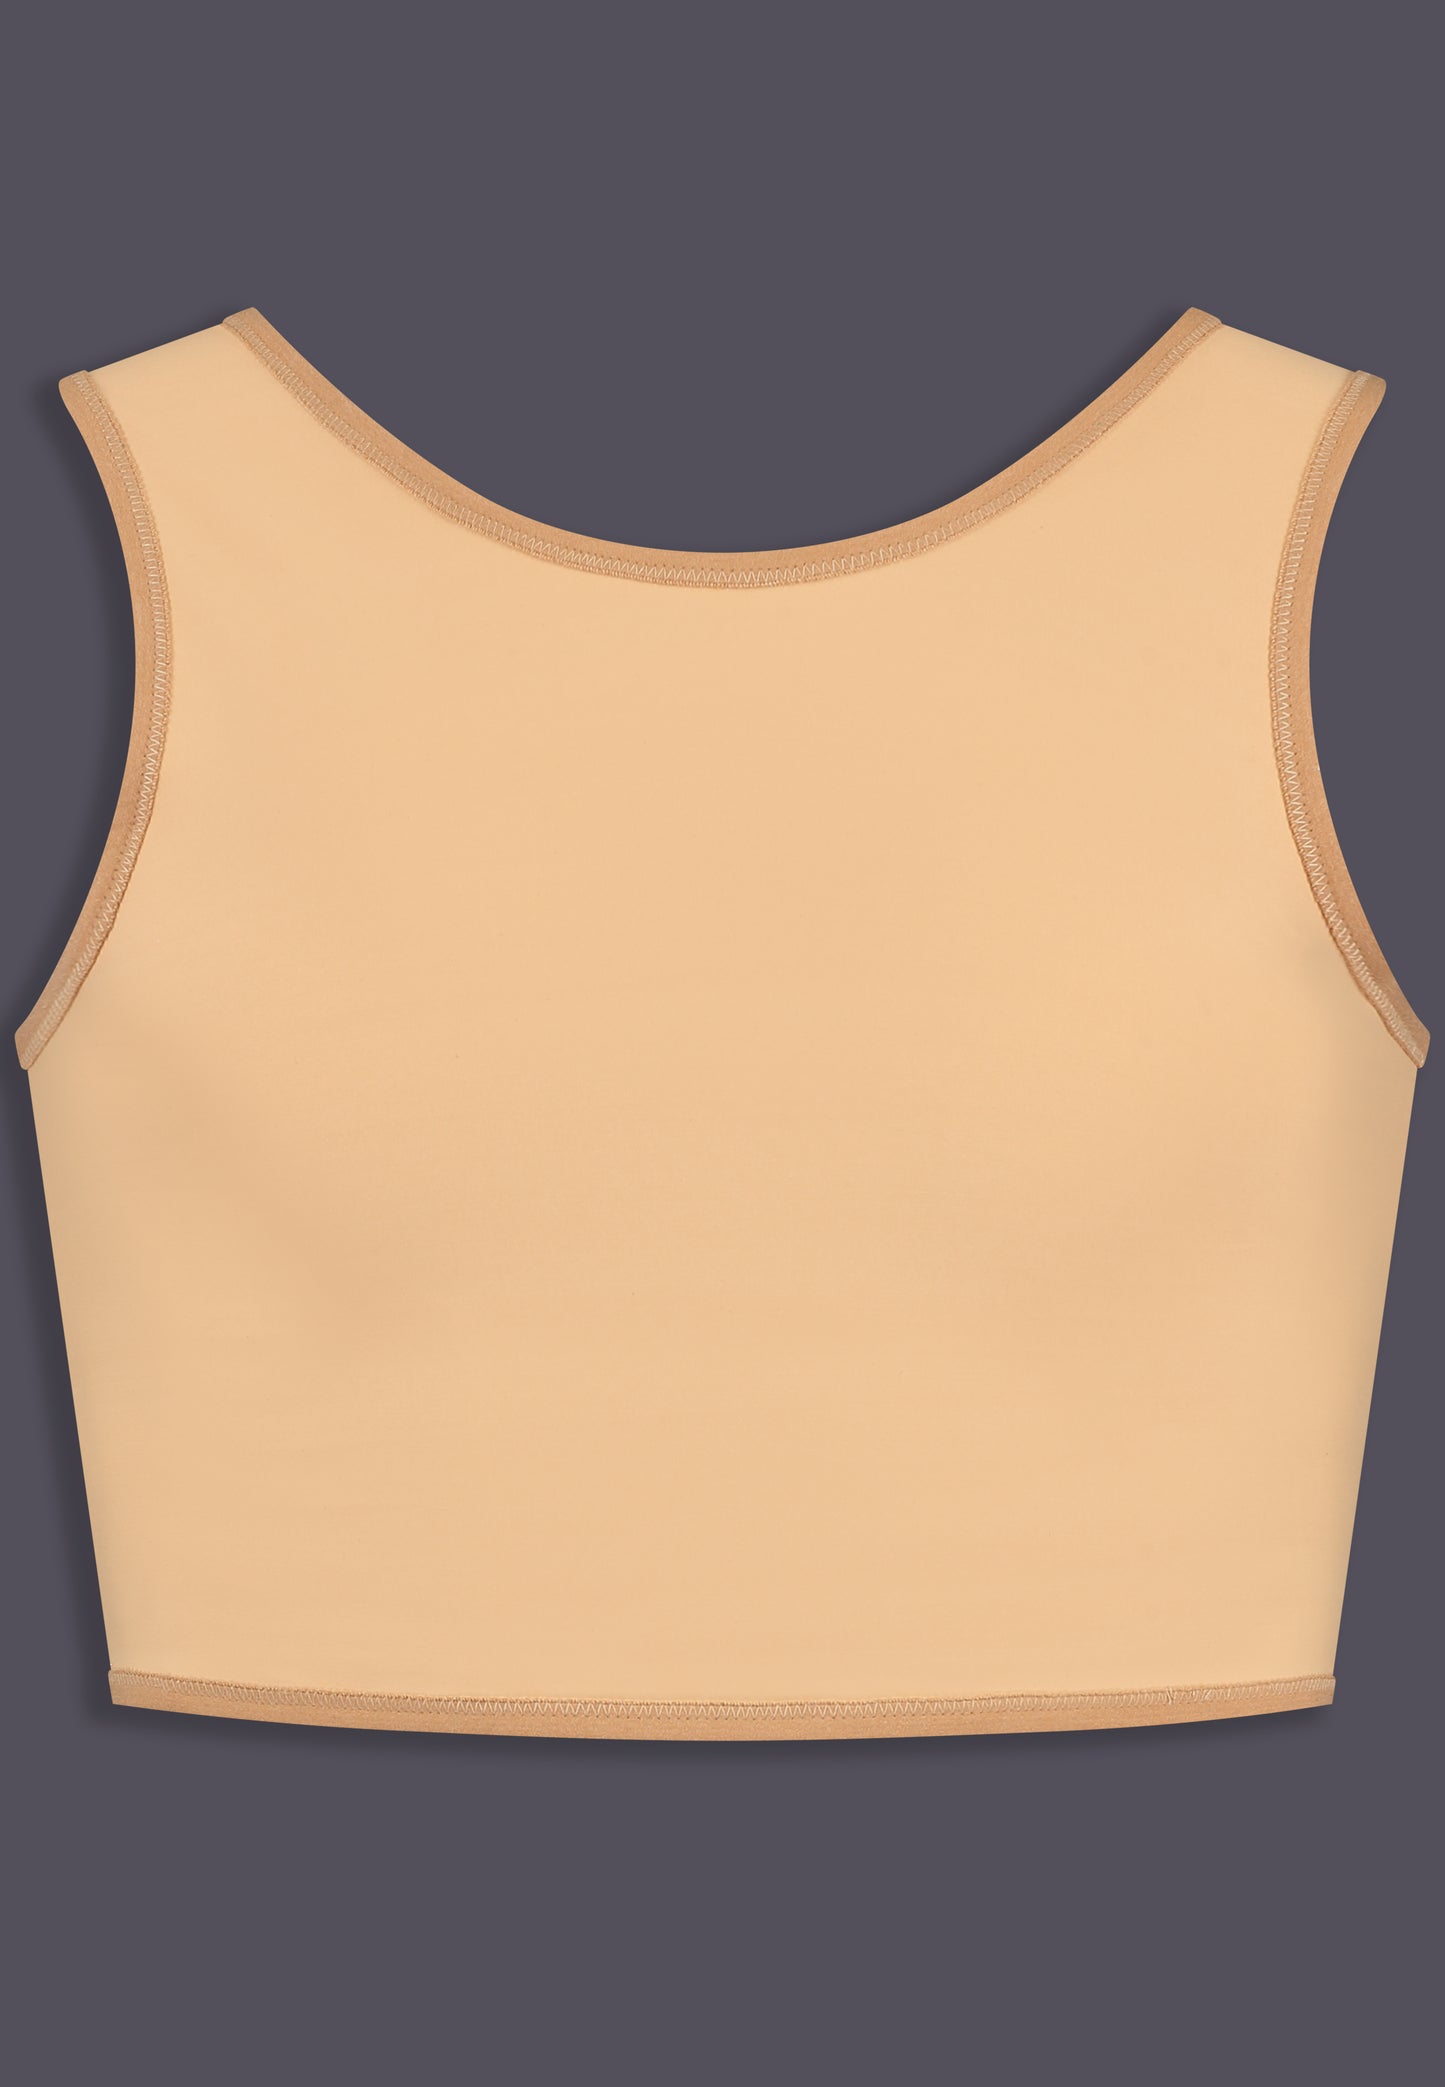 Gym Binder extra strong caramel front view